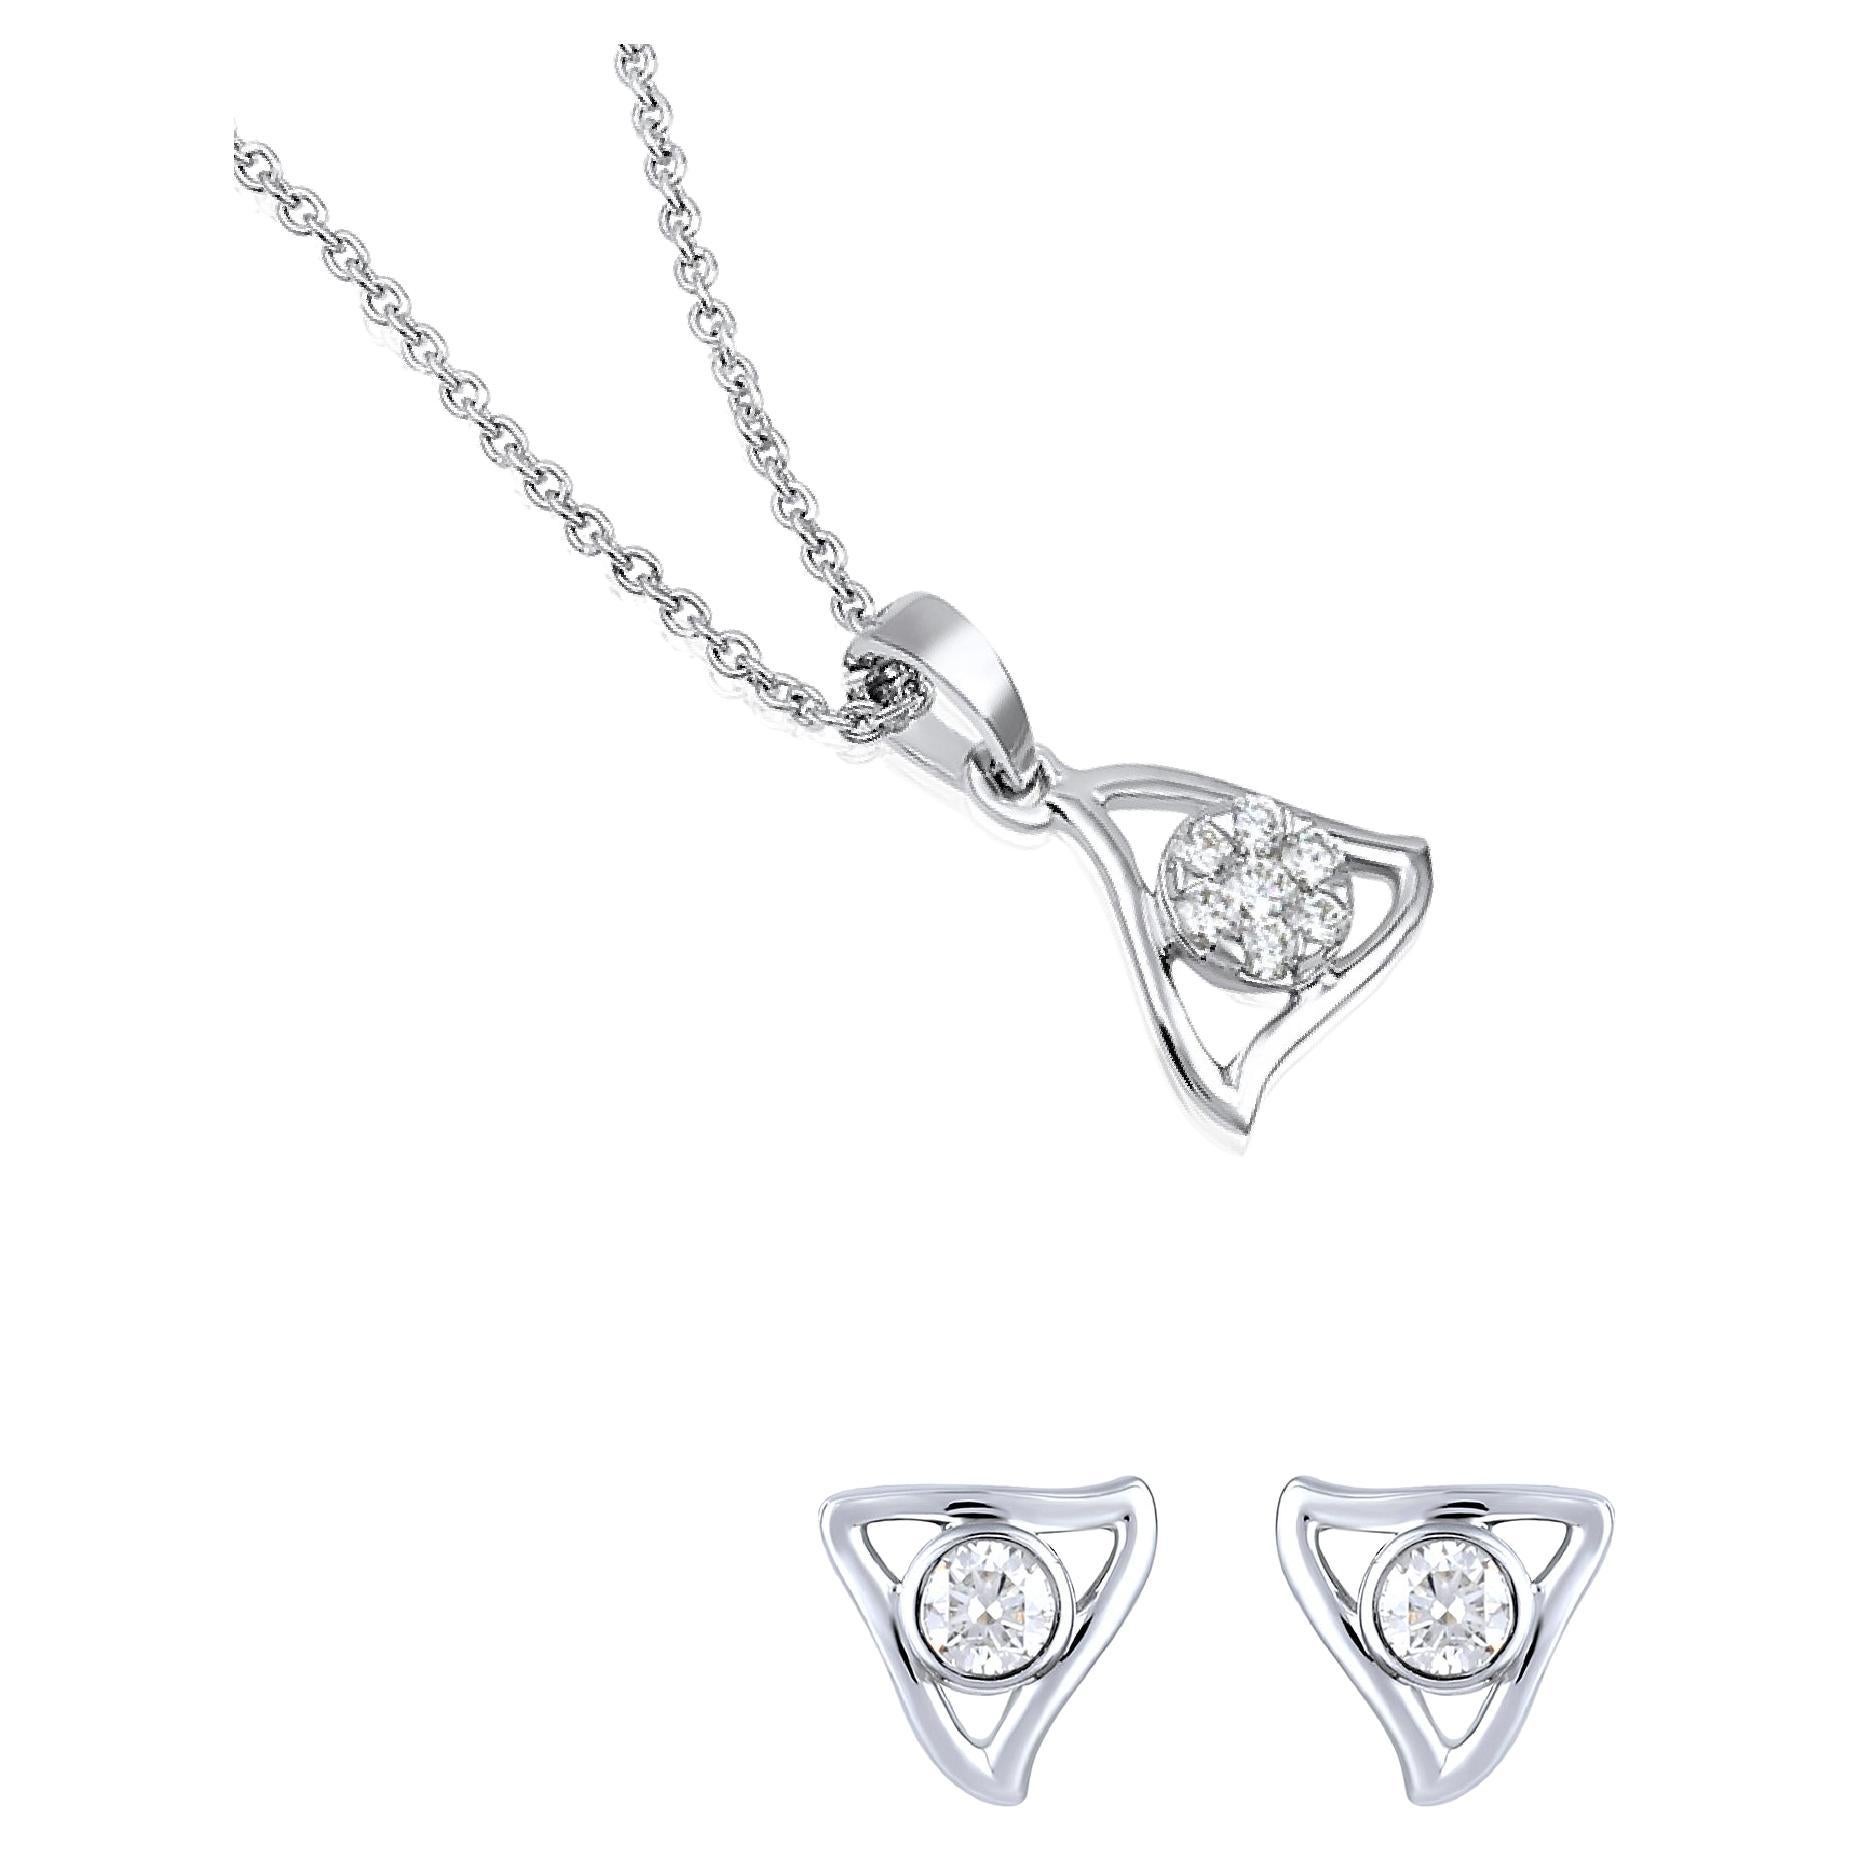 GSI Certified 14k Gold 0.2ct Natural Diamond F-VVS Triangle Necklace Earrings Se